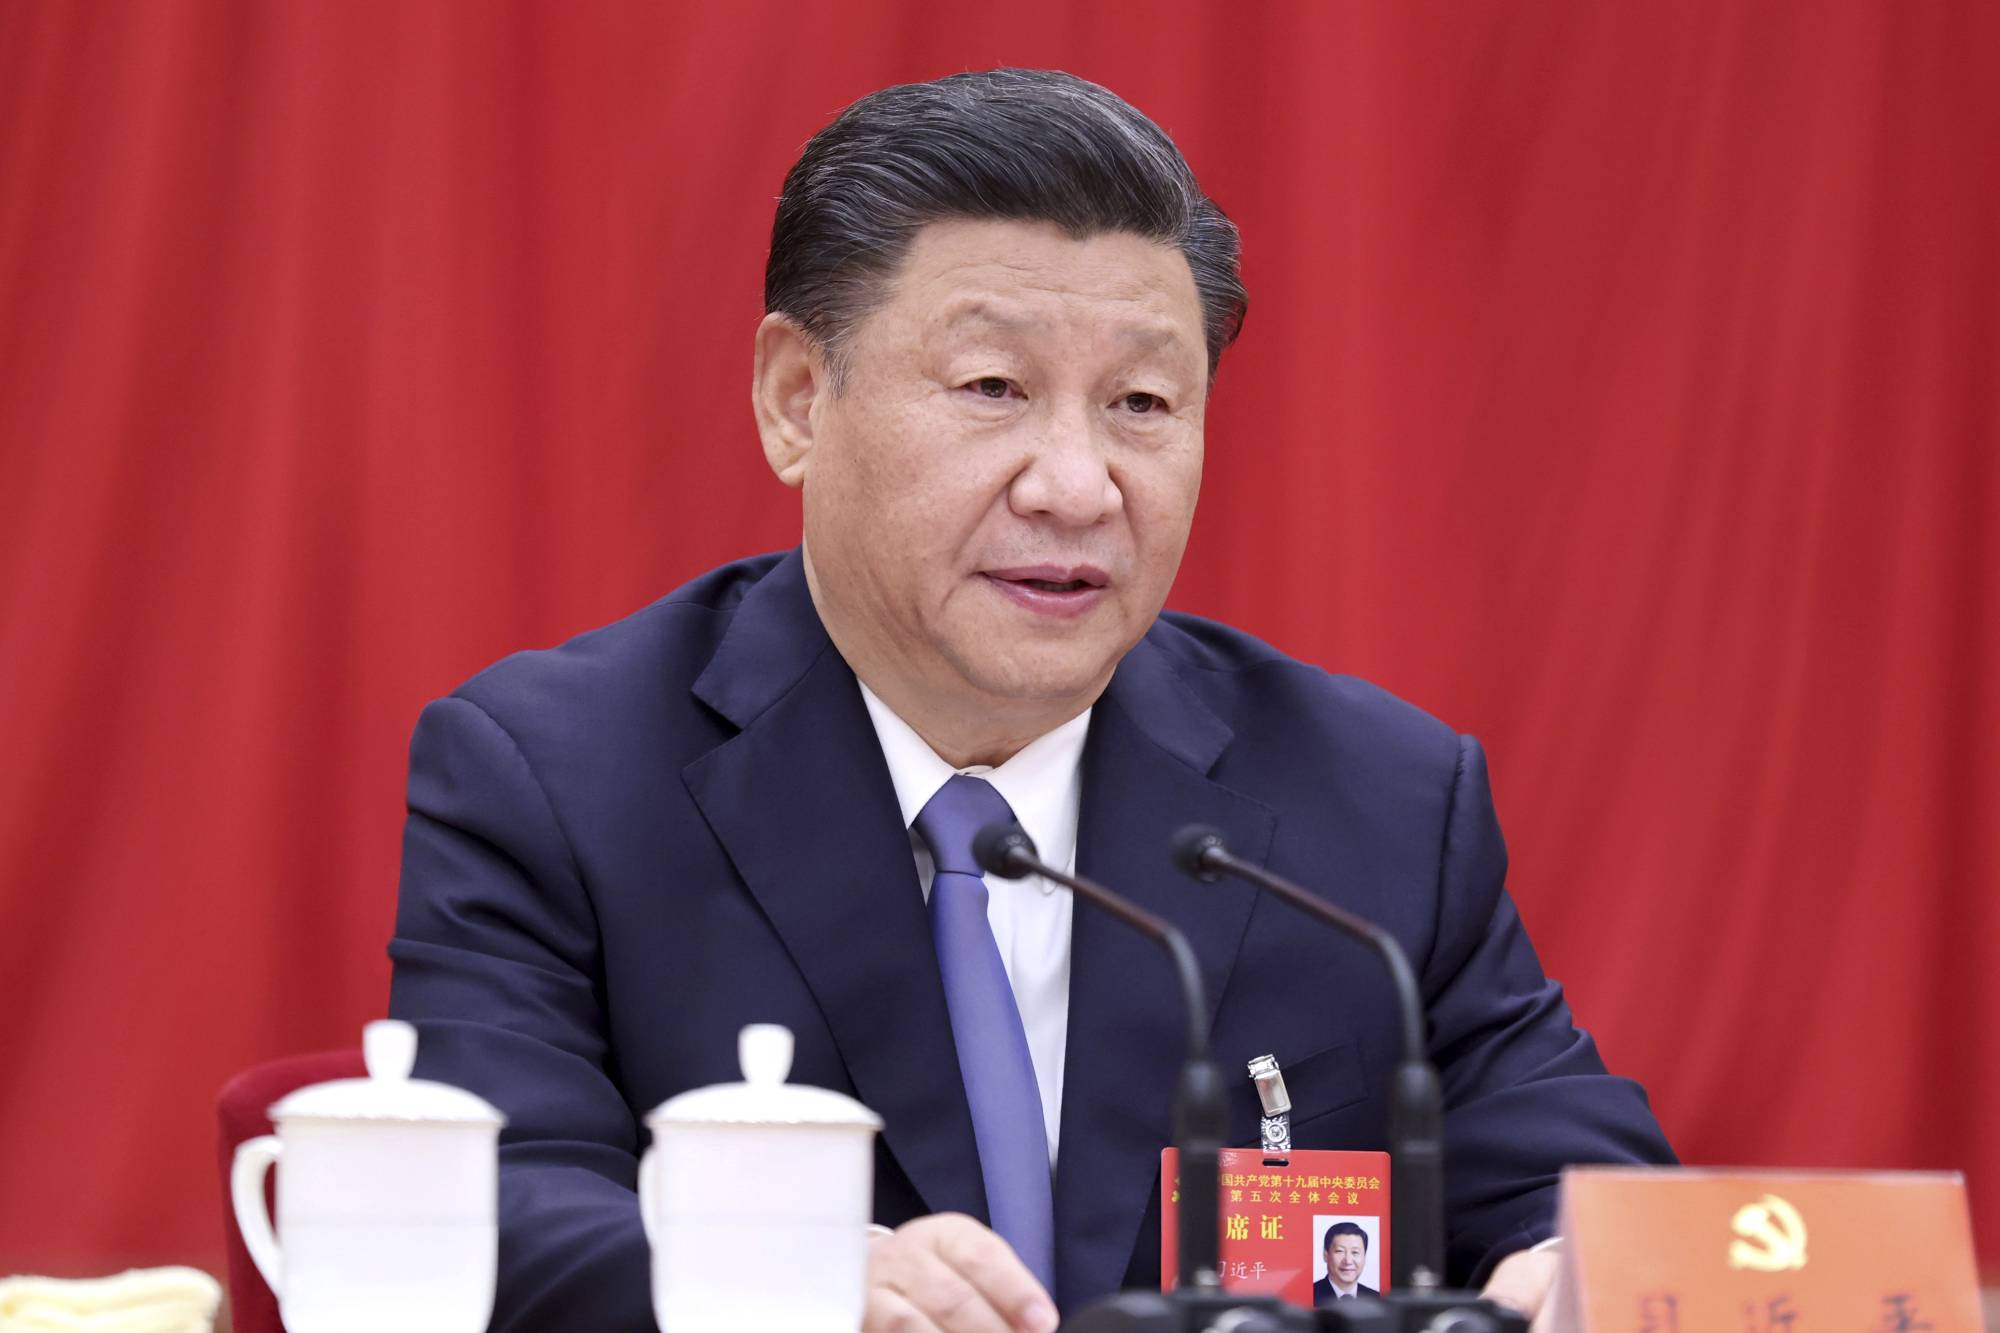 The 'dual circulation' strategy fits with calls from China's leaders under President Xi Jinping to make their country a self-reliant technological power. | XINHUA / VIA AP